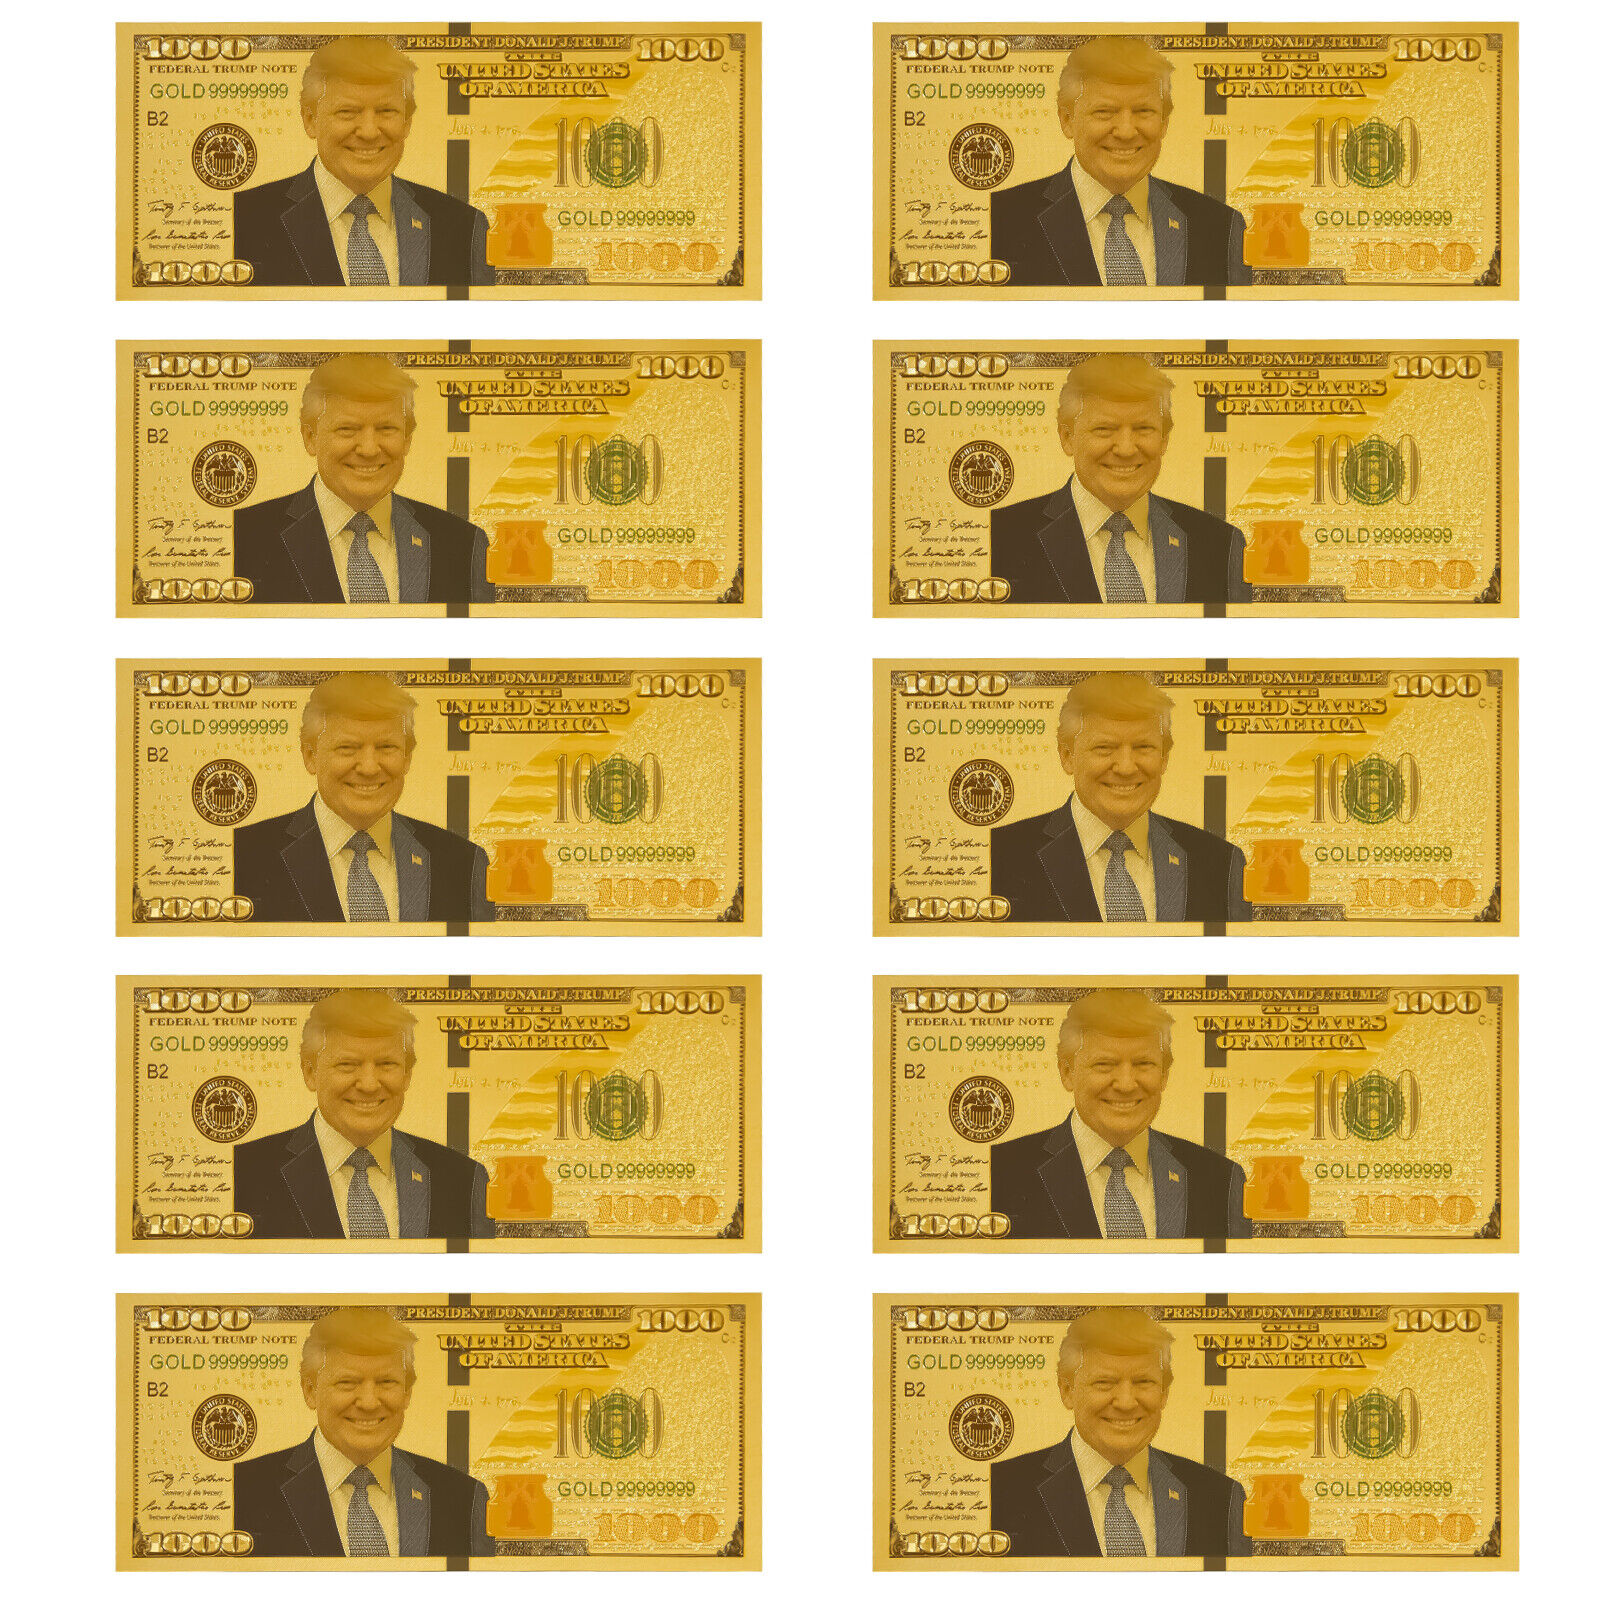 10X New President Donald Trump Colorized $1000 Dollar Bill Gold Foil Banknote US